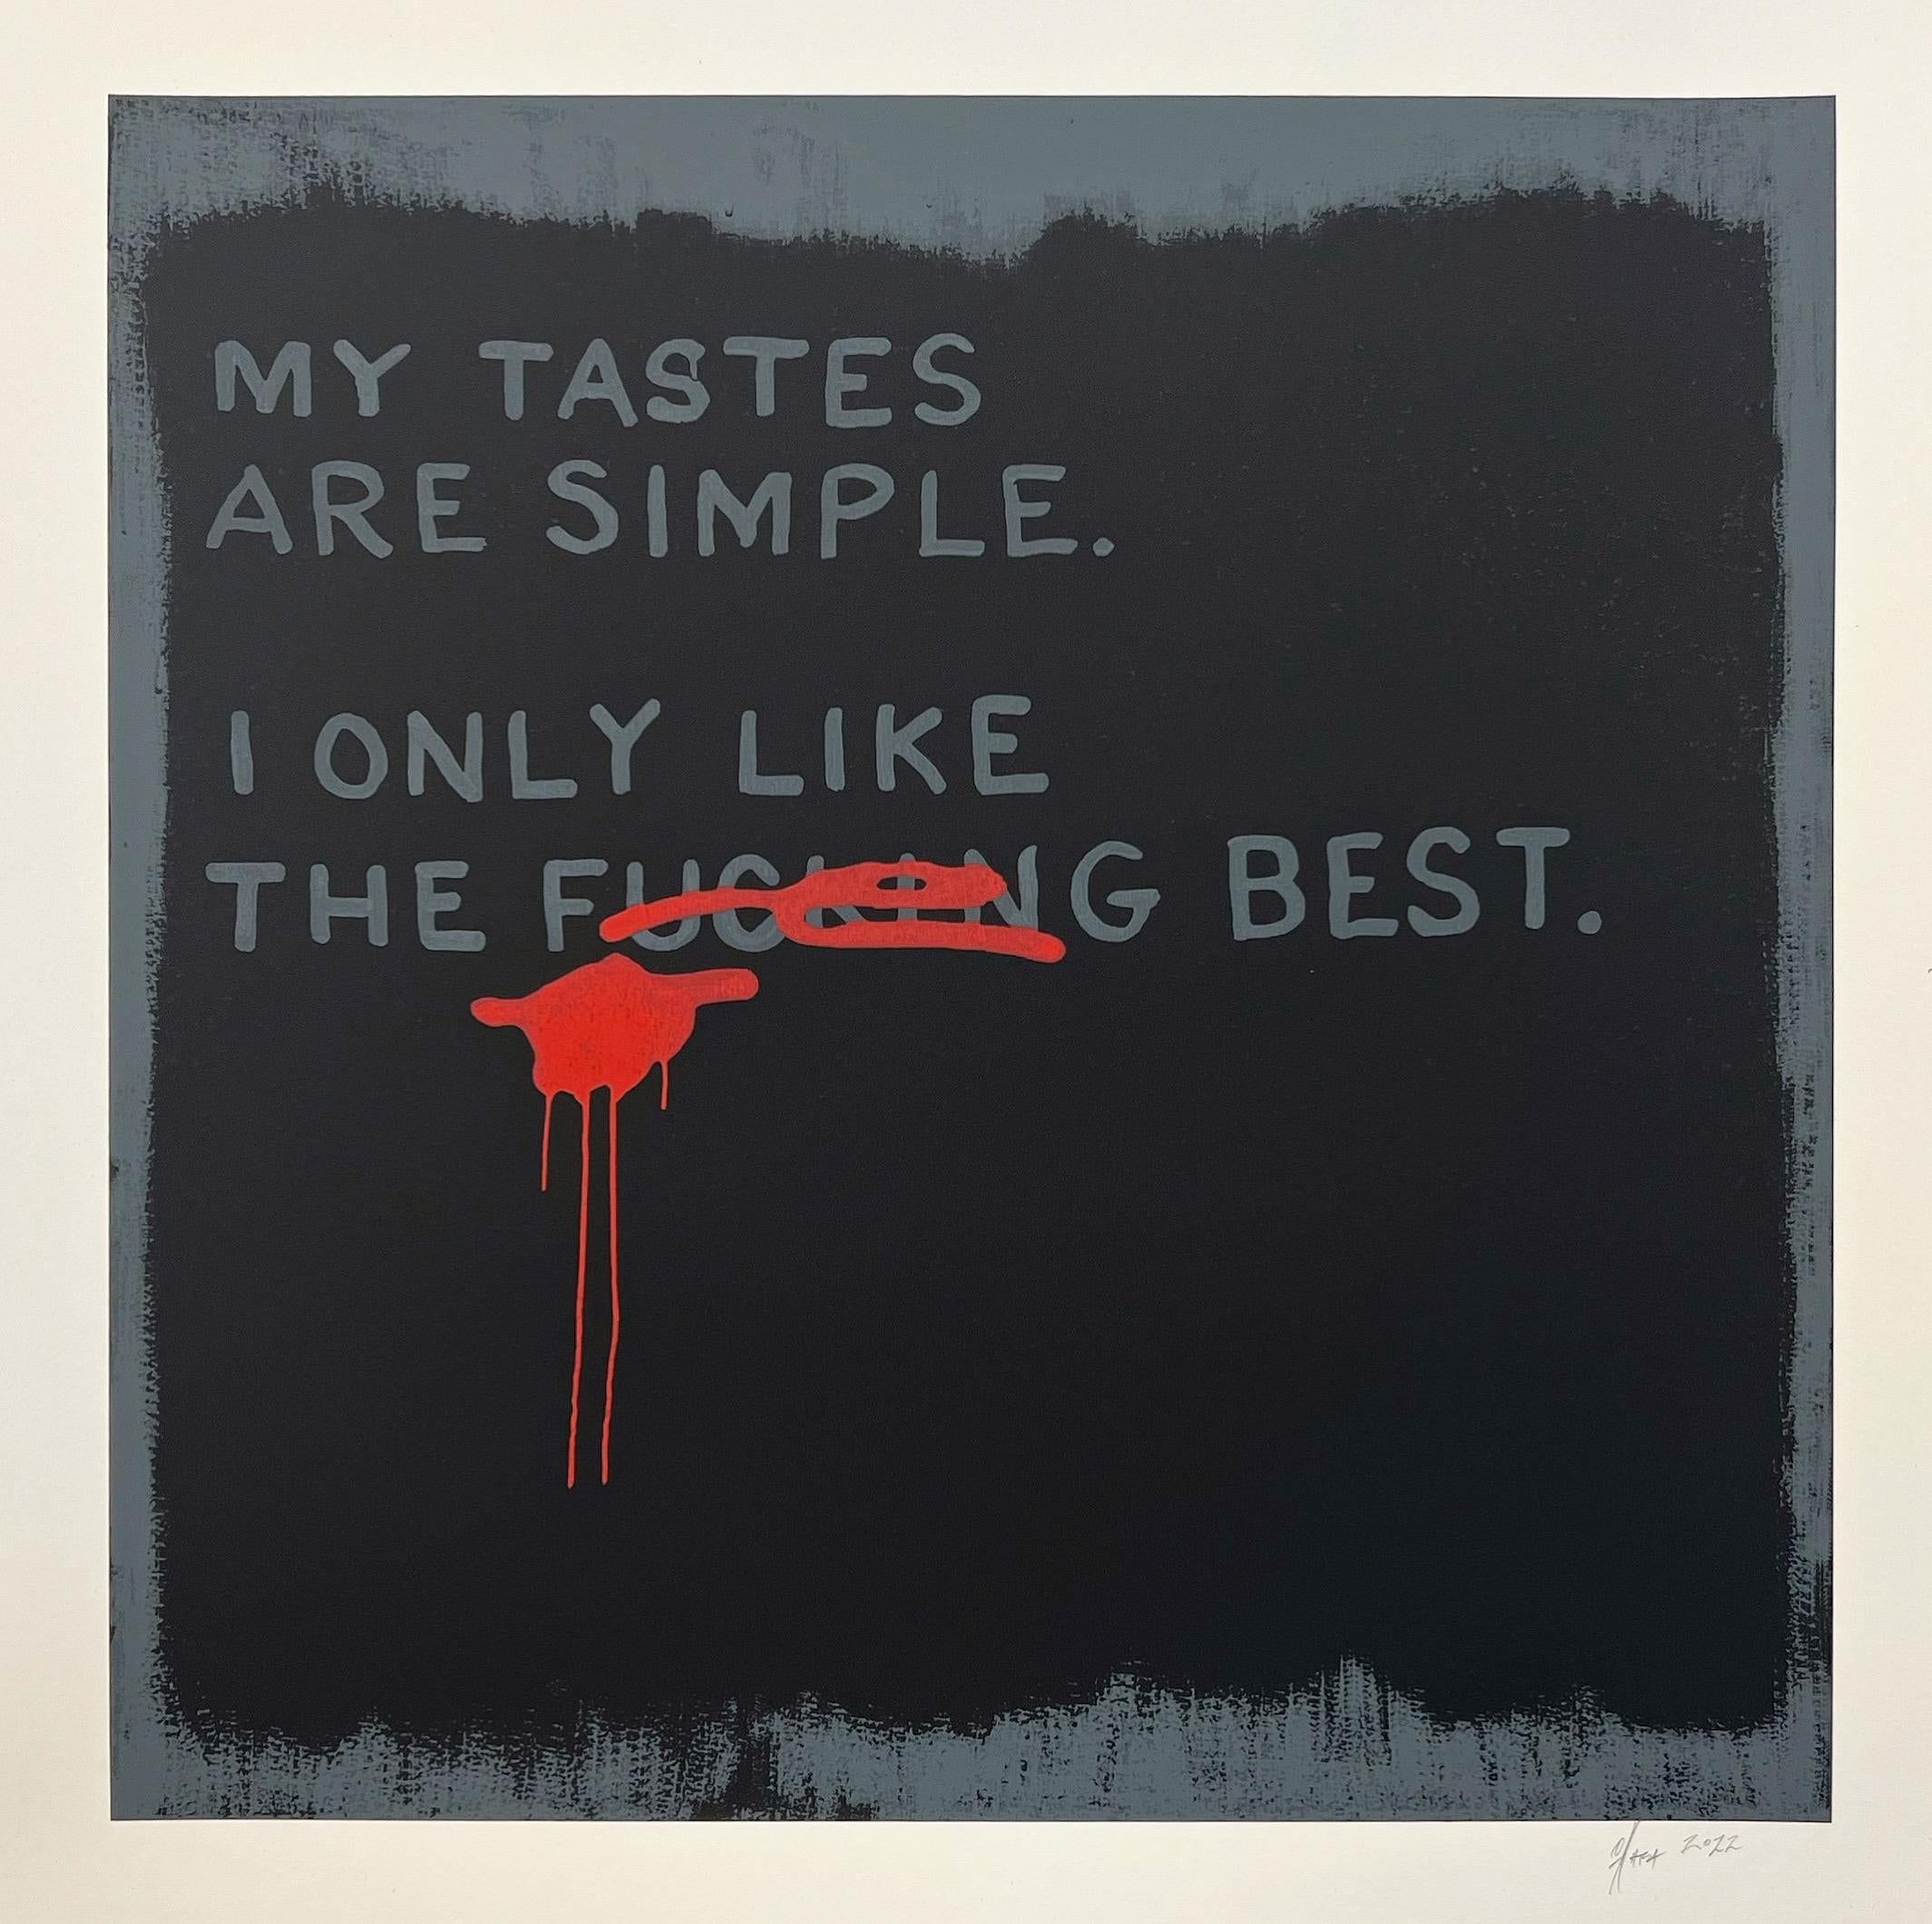 John O'Hara's famous The xxxxxxx Best painting is now a 3-Color Serigraph on recycled Archival Hemp Paper. Hand signed by the artist.

This work is unframed. 27.5 x 27.5 inches

Forsyth (Saint Louis) is proud to be the exclusive gallery of John